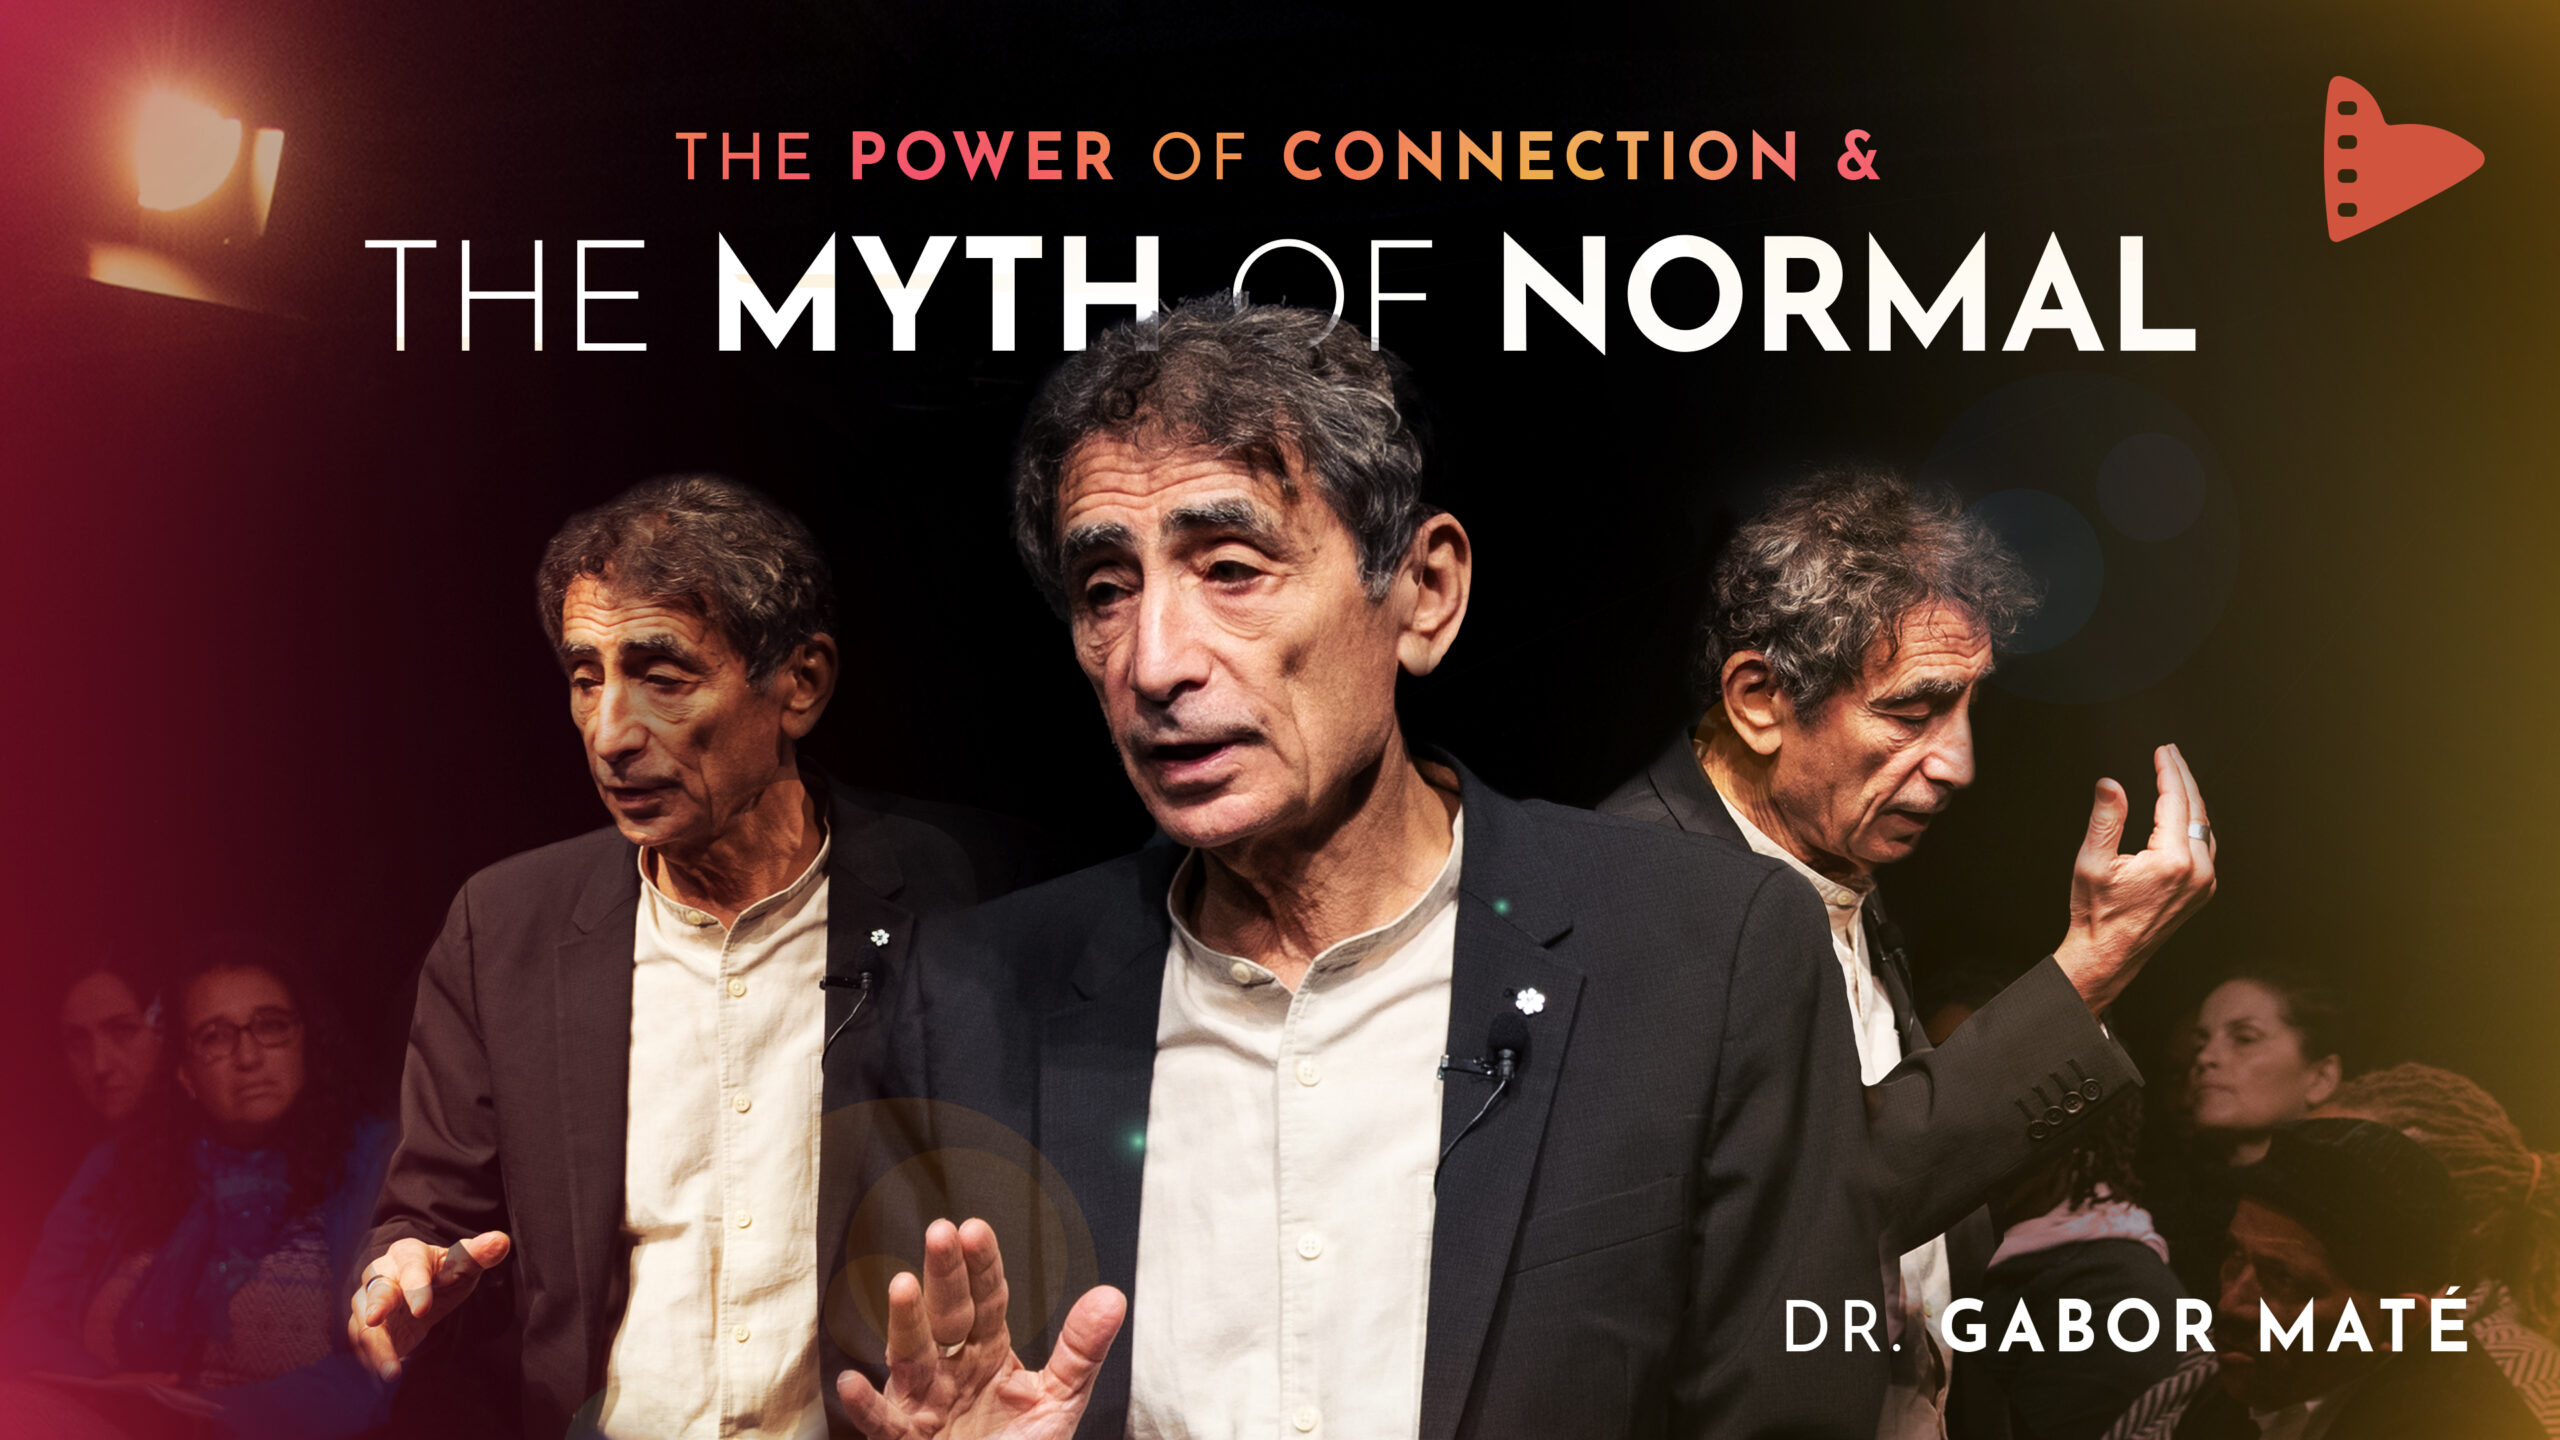 Episode One: The Power of Connection & The Myth of Normal